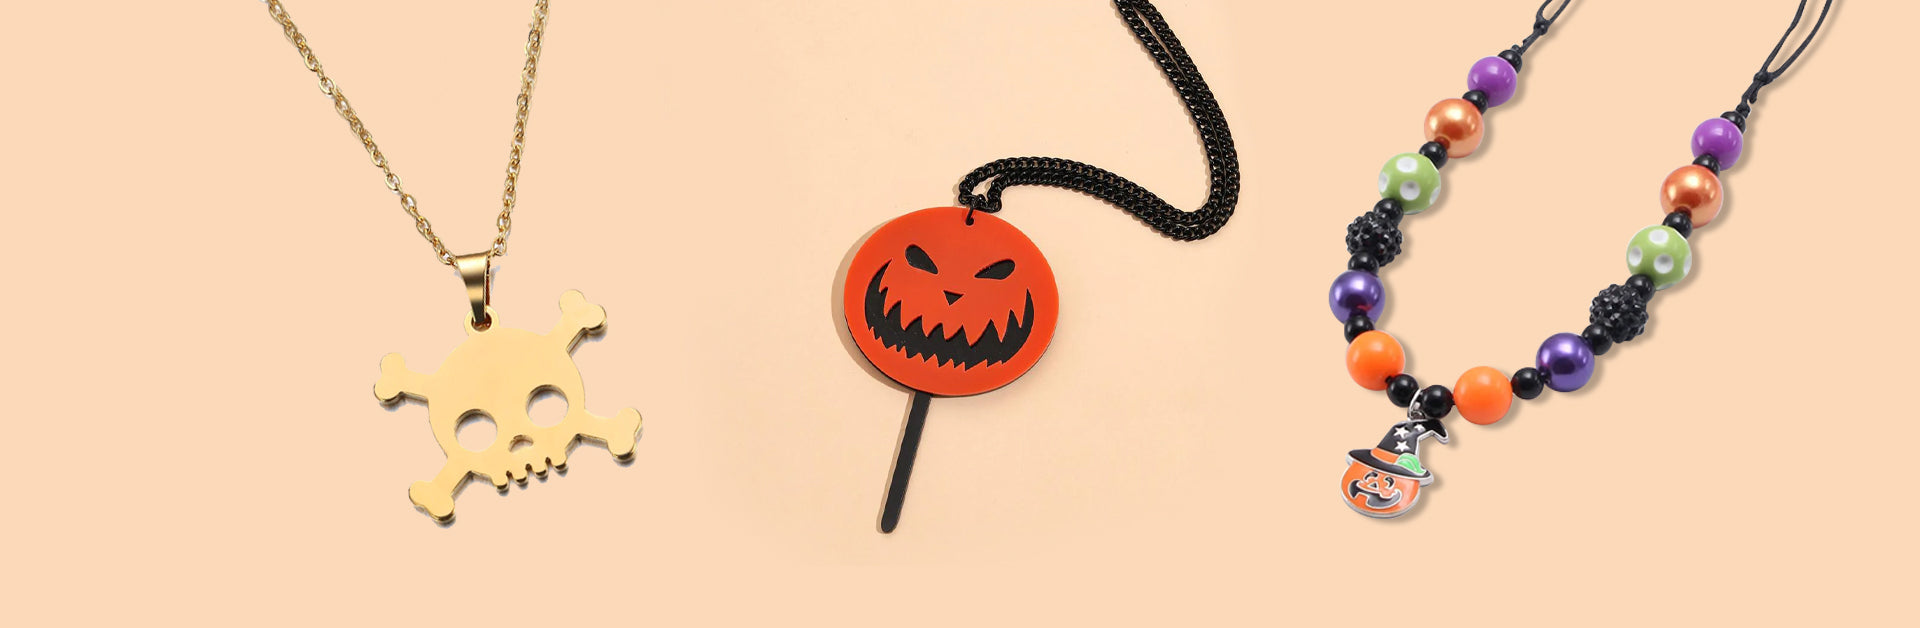 Top 5 Halloween Jewelry Collection Ideas: Elevate Your Spooky Style